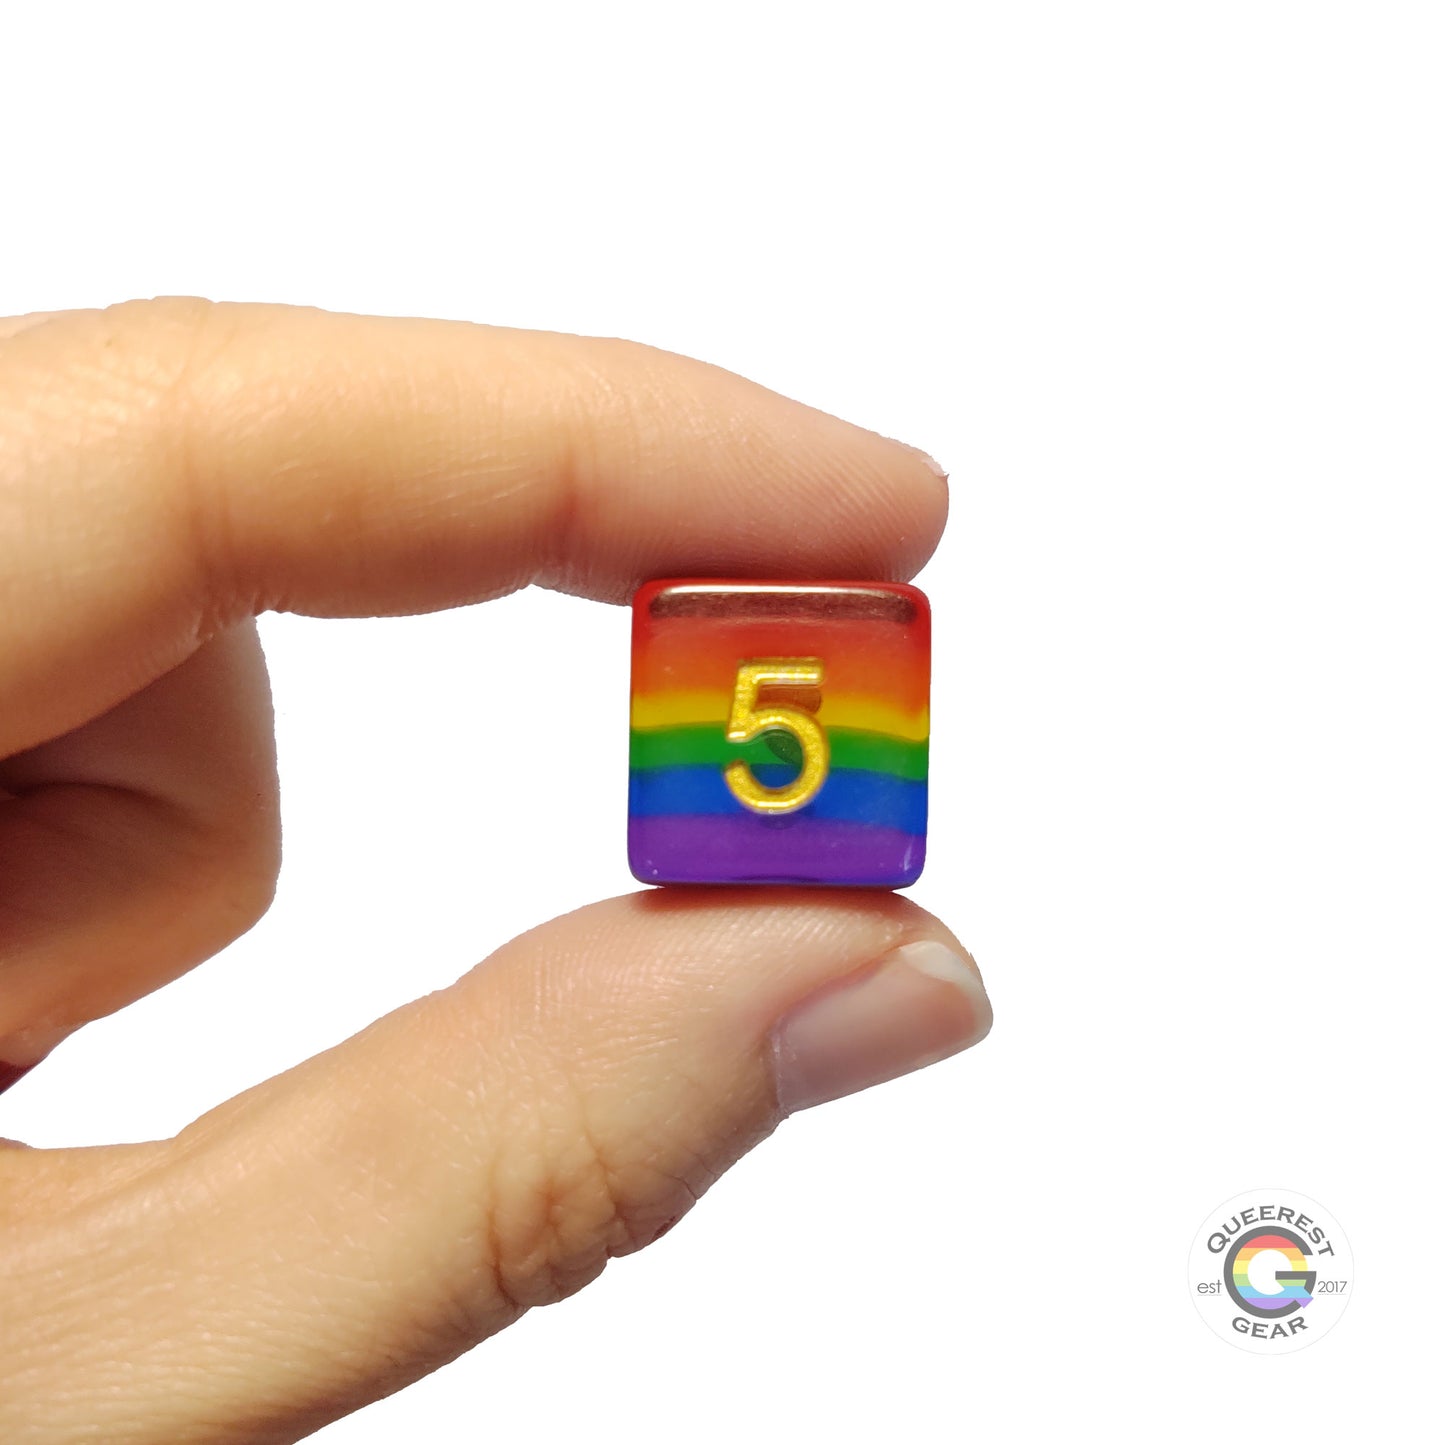  A hand holding up the rainbow d6 to show off the color and transparency